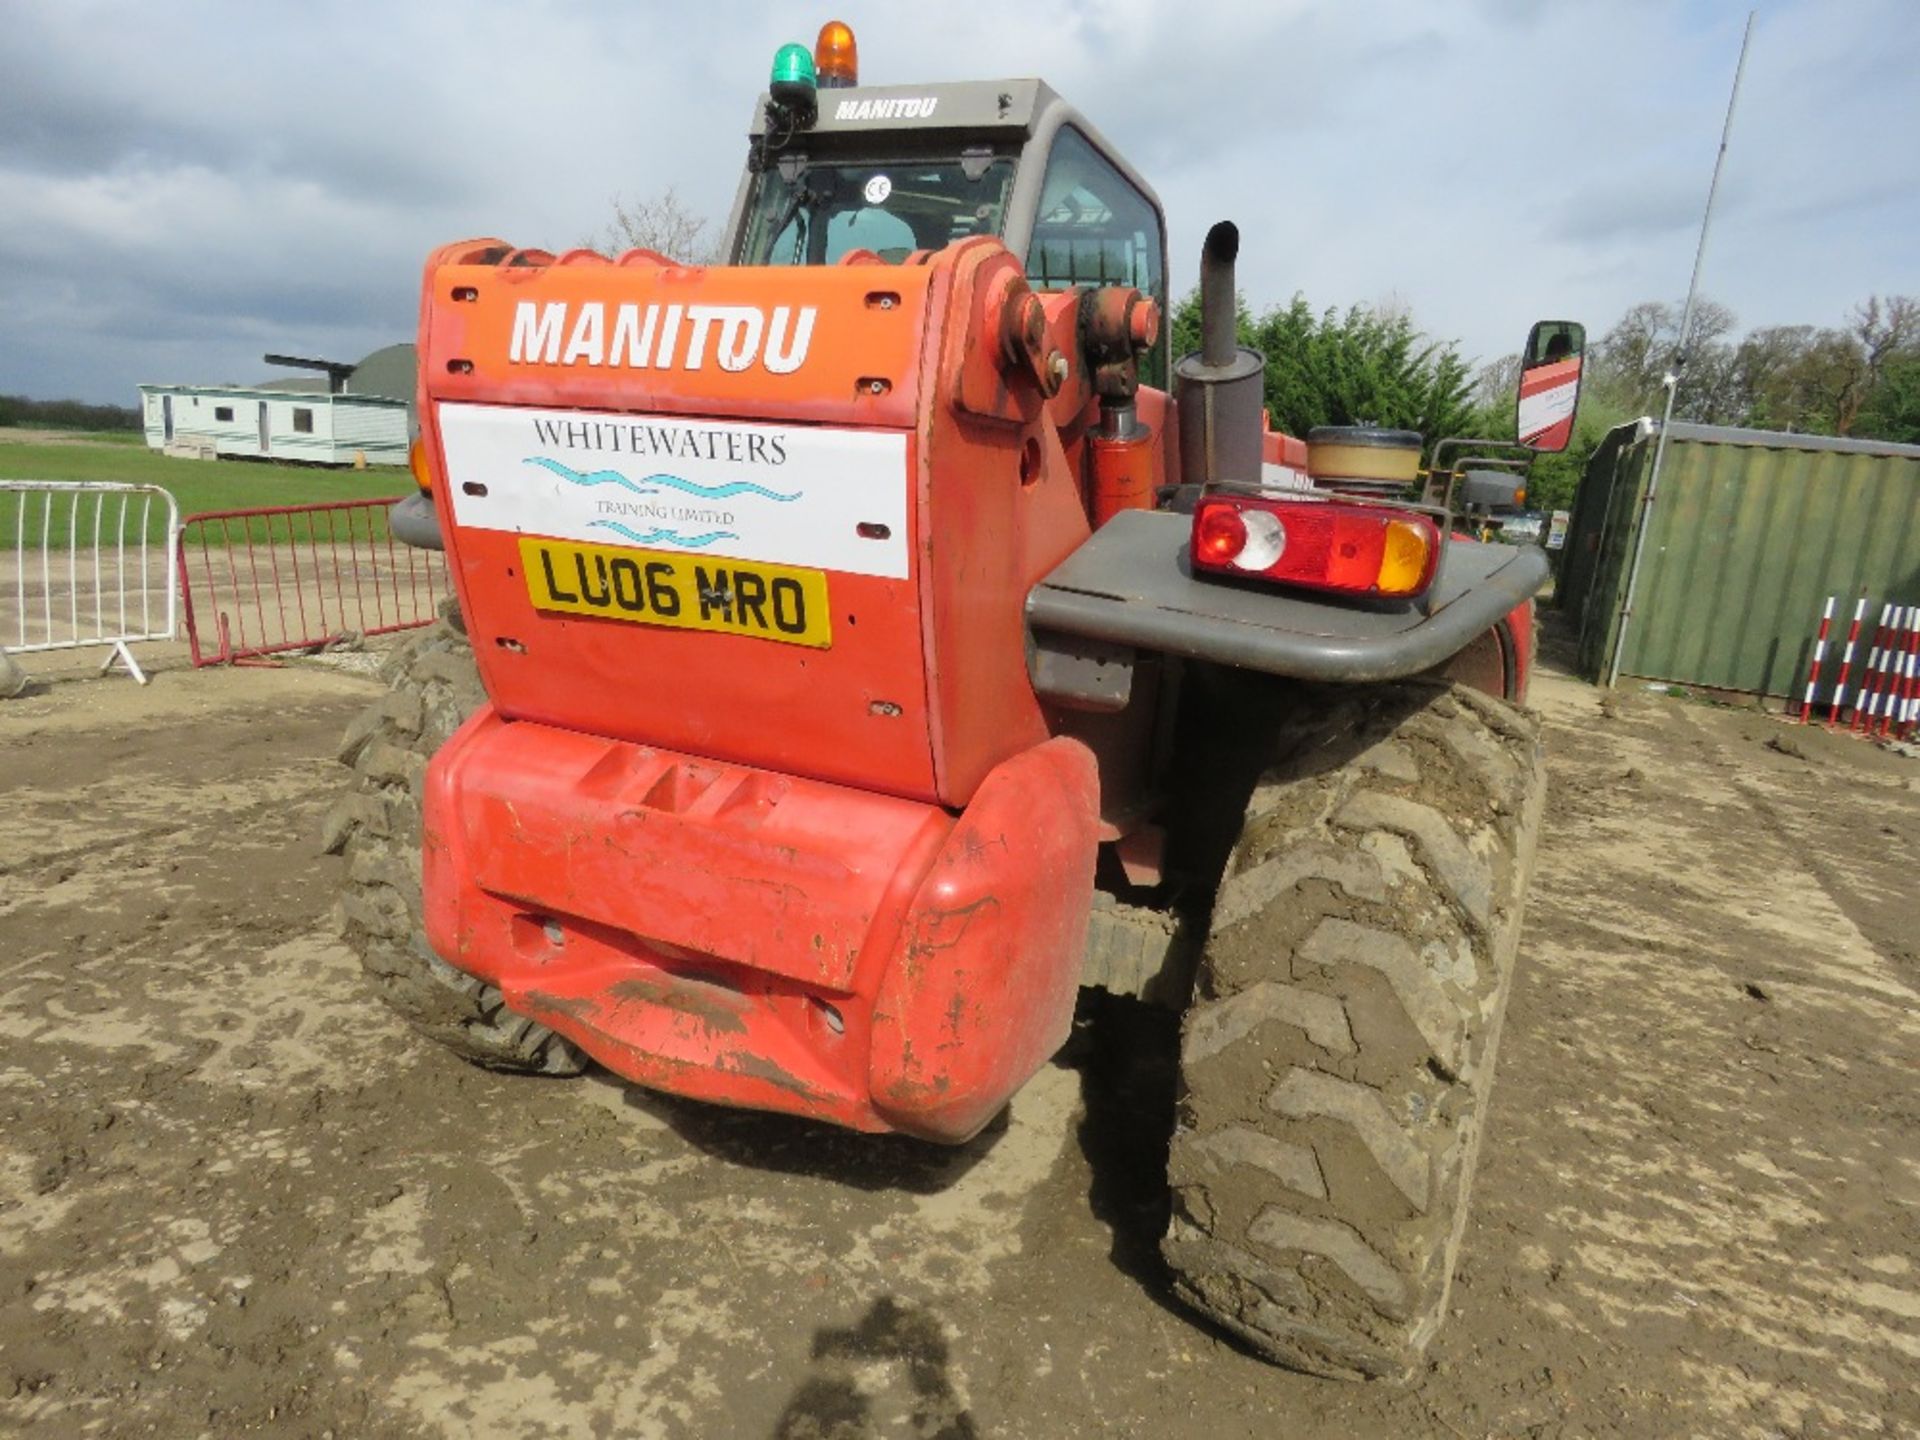 MANITOU 1435SL TELESCOPIC HANDLER REG:LU06 MRO (LOG BOOK TO APPLY FOR). 7965 REC HRS. YEAR 2006 BUIL - Image 3 of 14